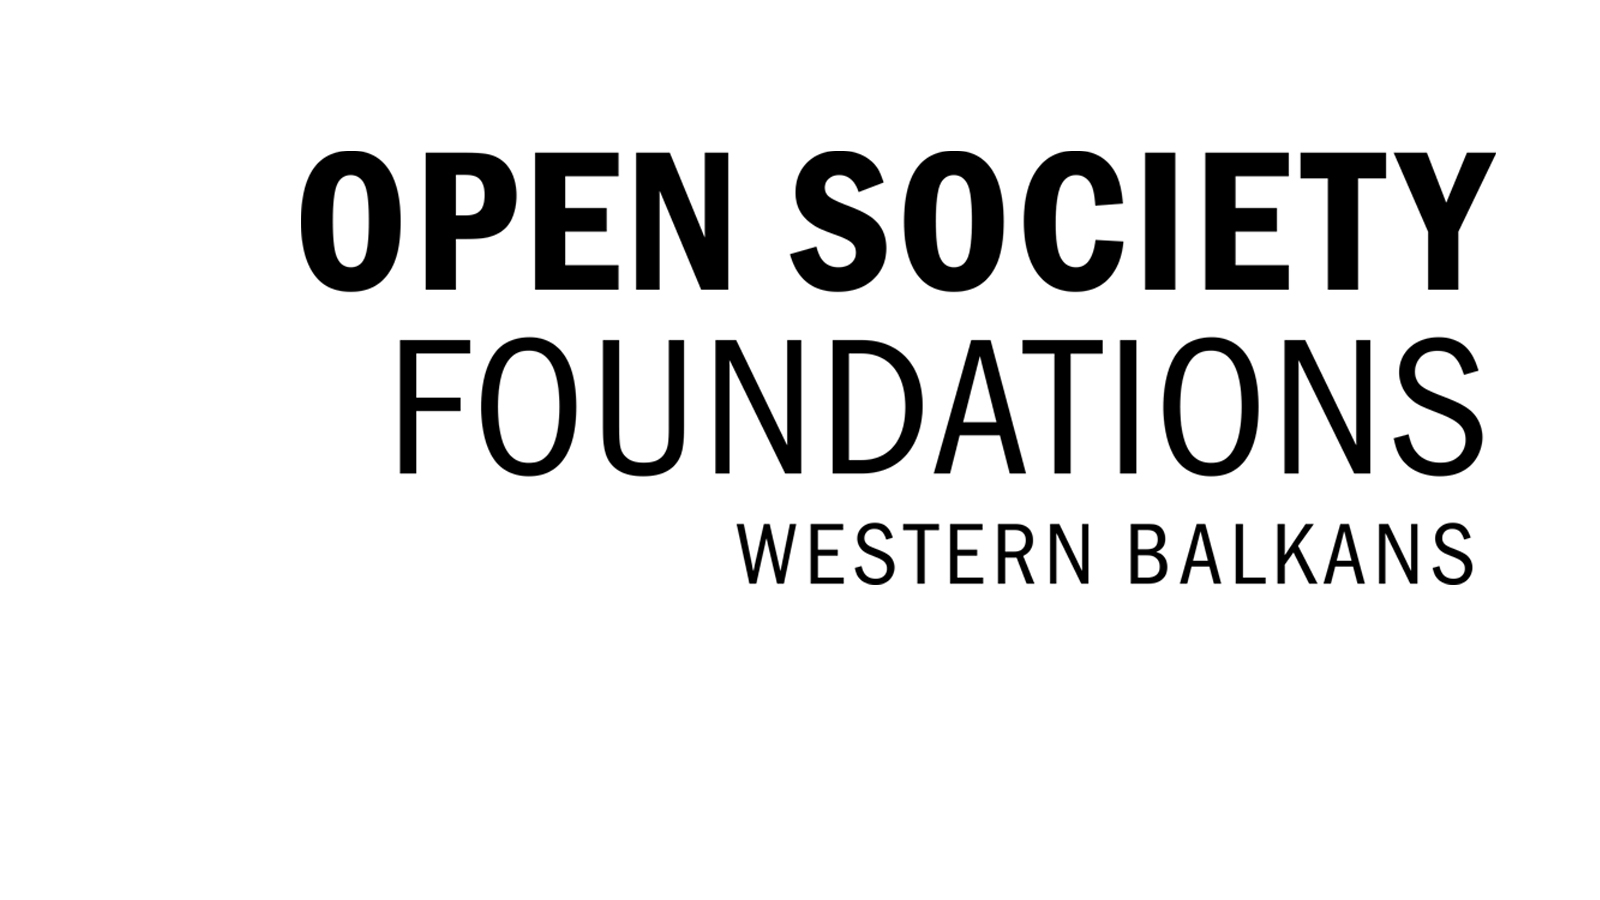 Open Society Foundations in the Western Balkans